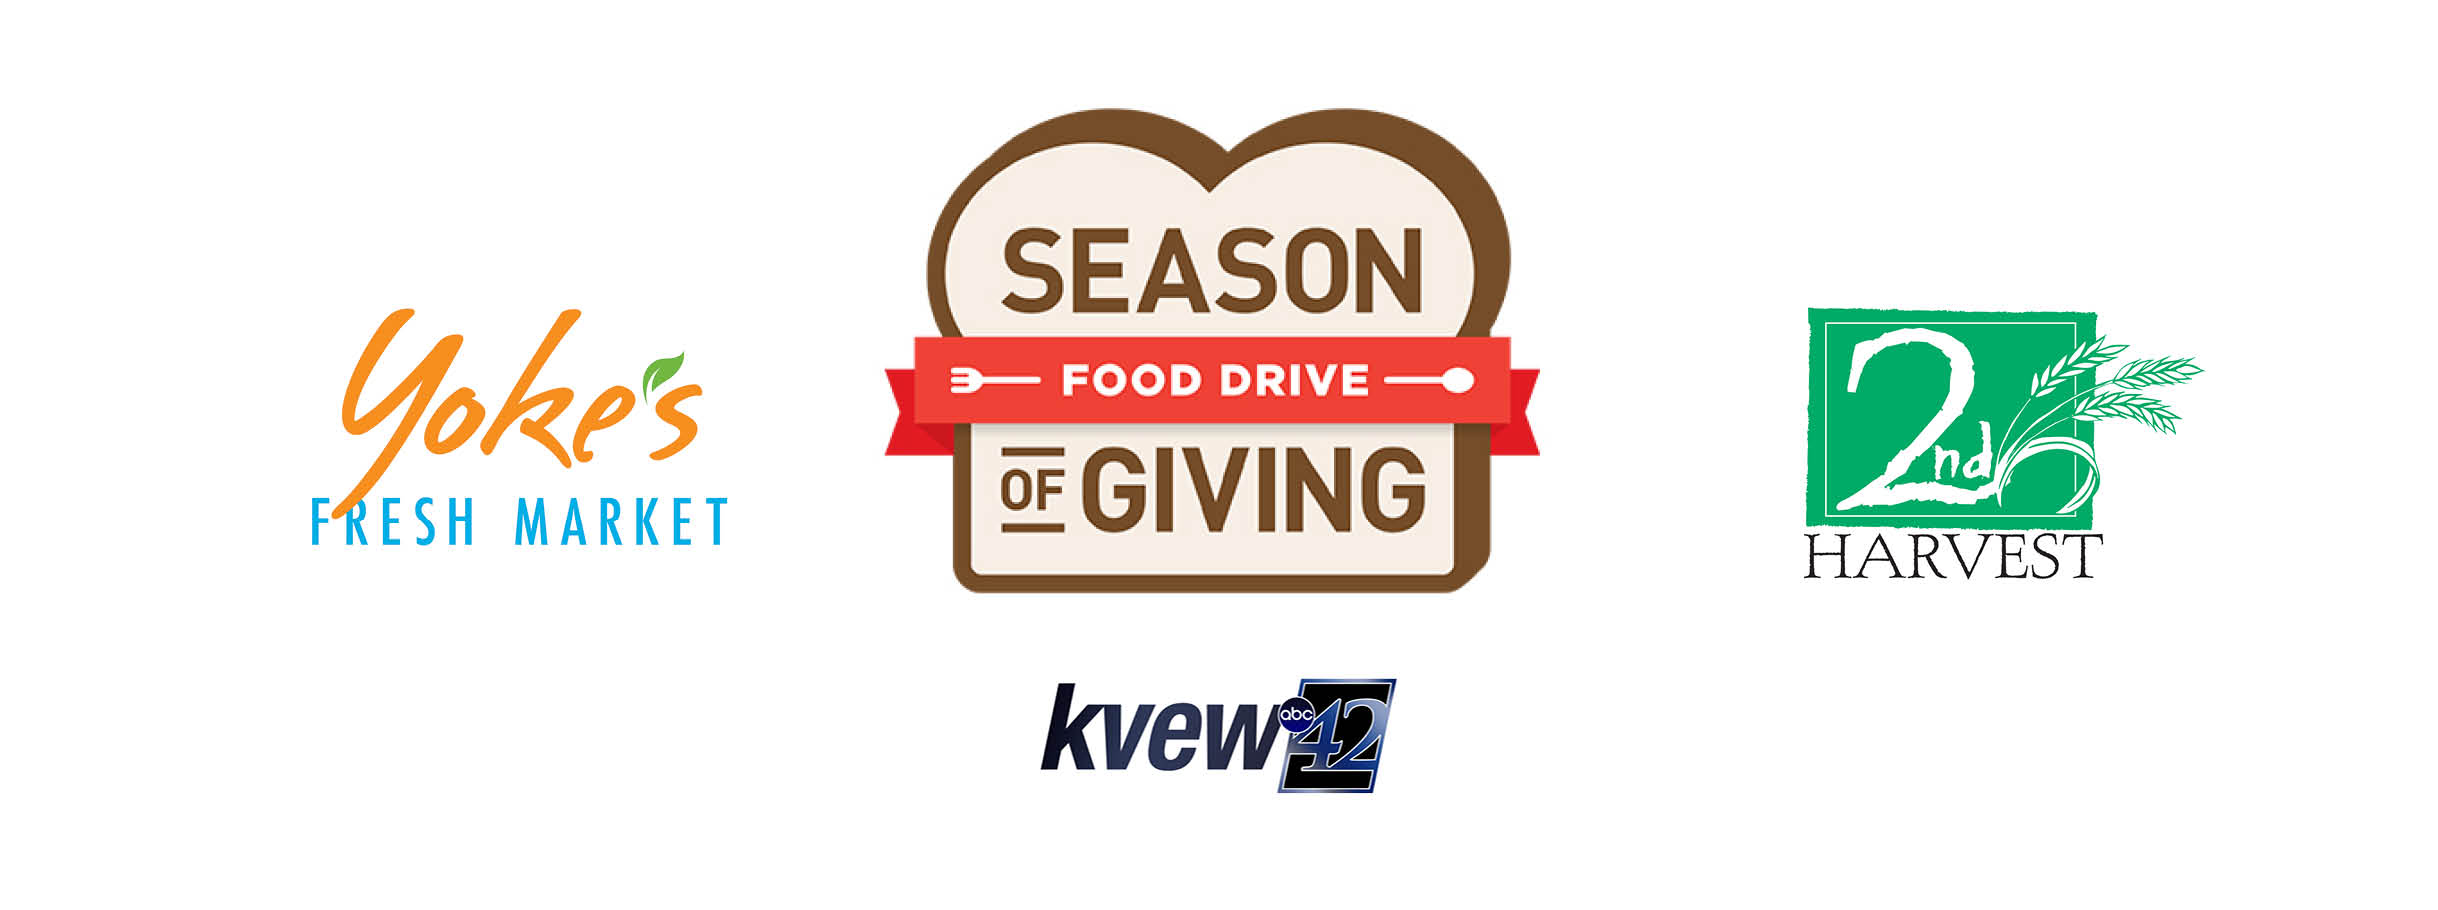 Second Harvest Season of Giving Food Drive